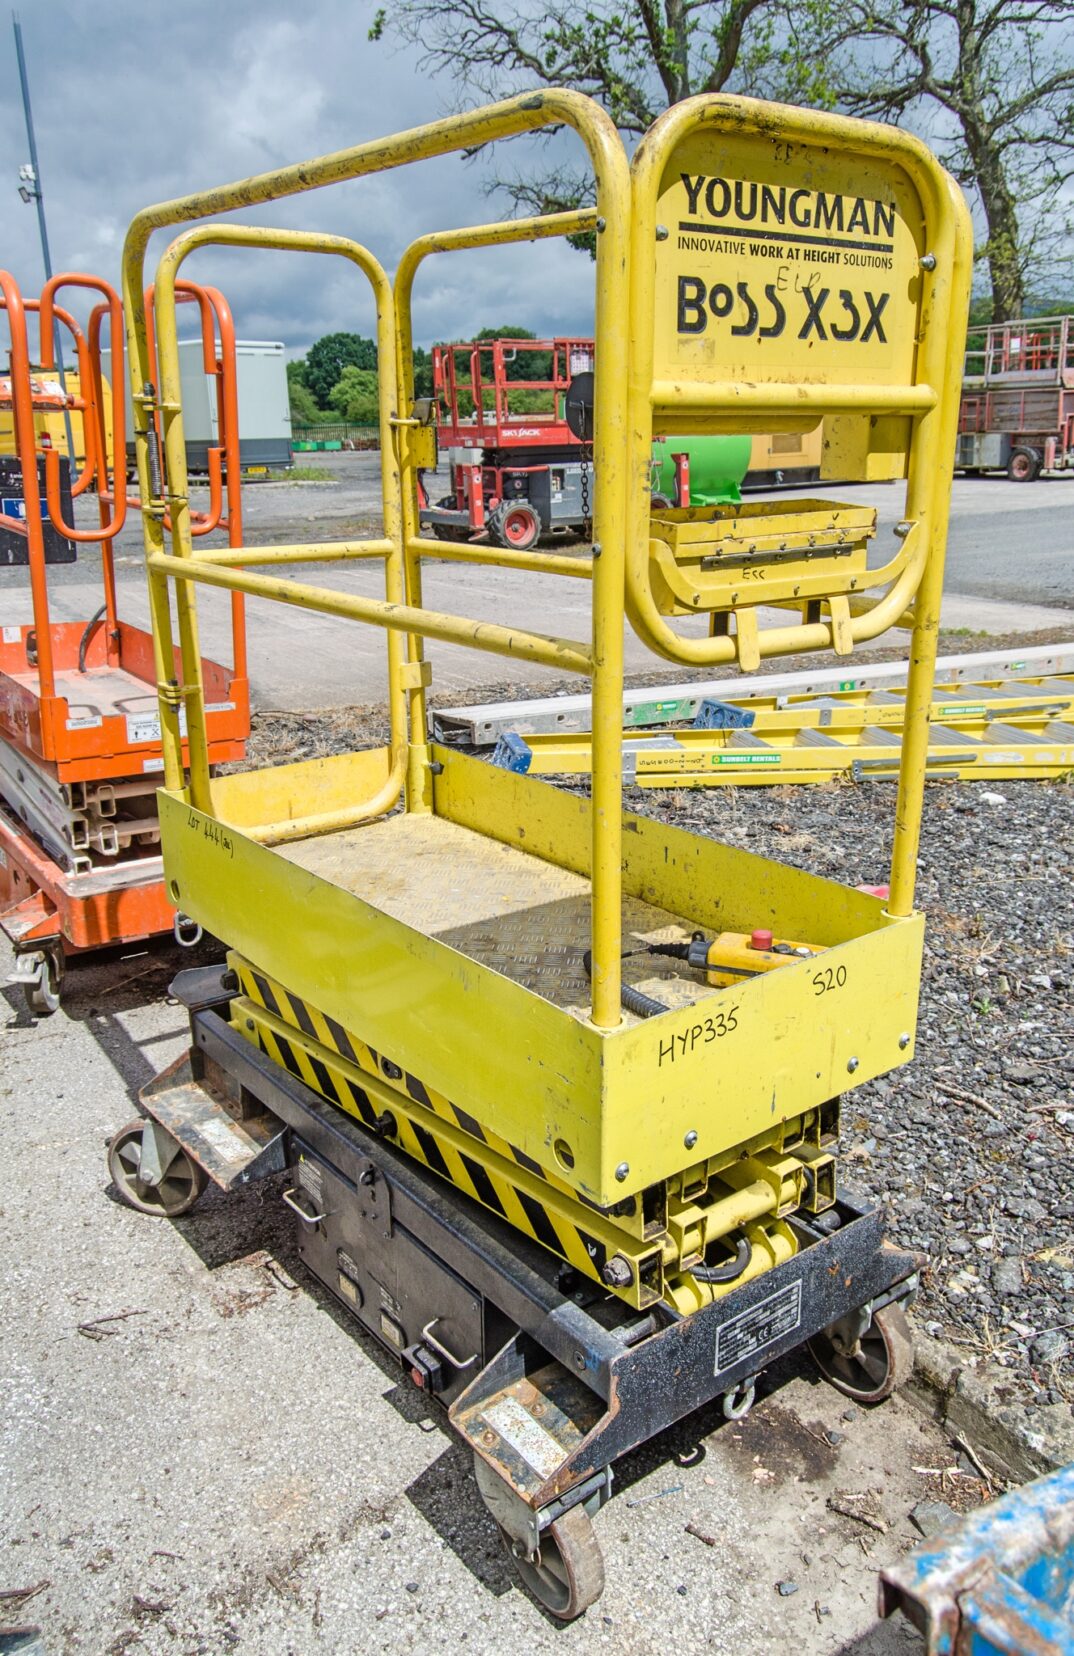 Boss X3X battery electric push around For Auction on: 2024-07-11 For Auction on 2024-07-11